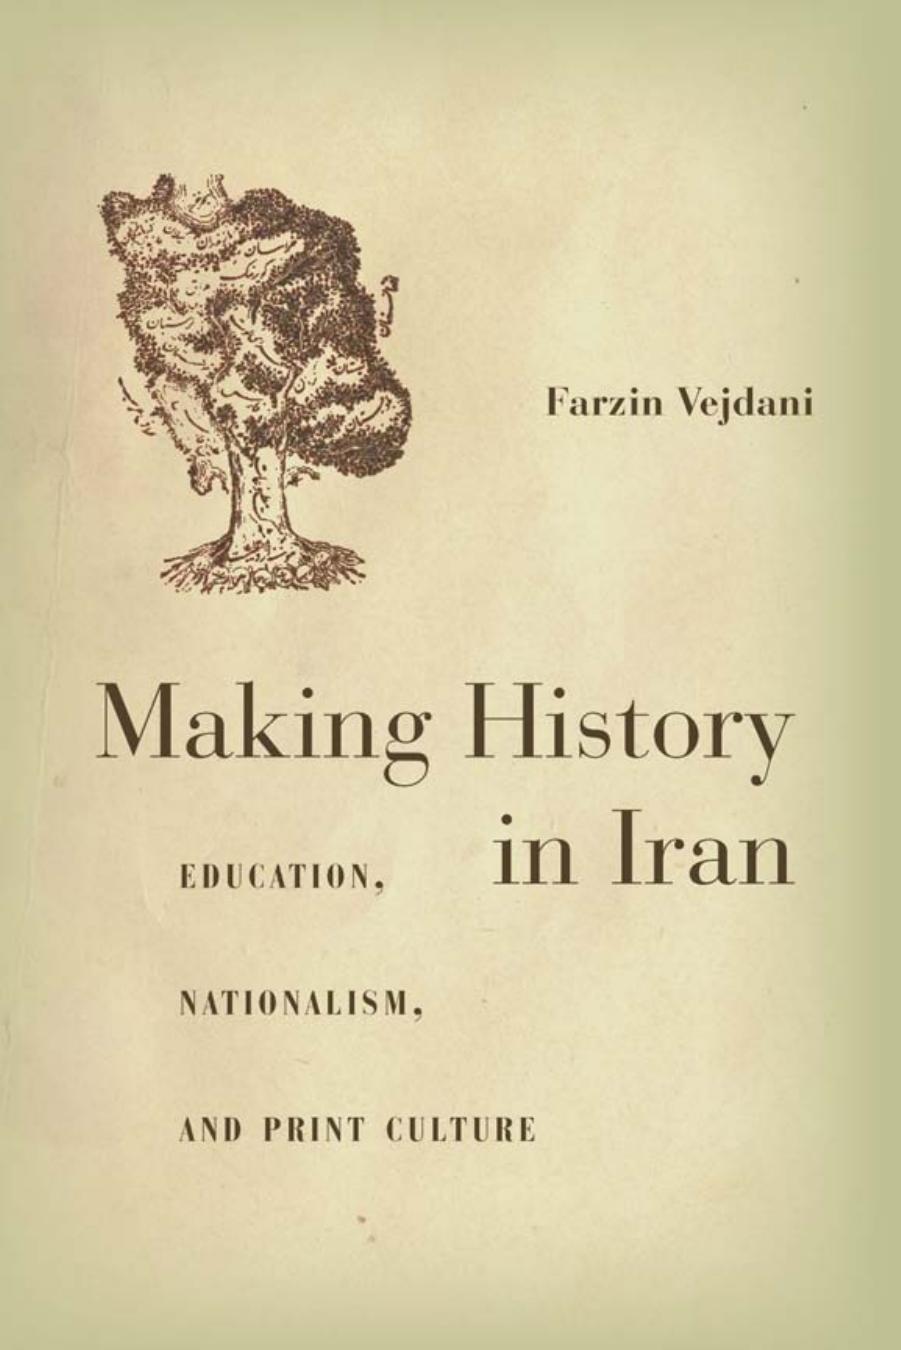 Making History in Iran: Education, Nationalism, and Print Culture